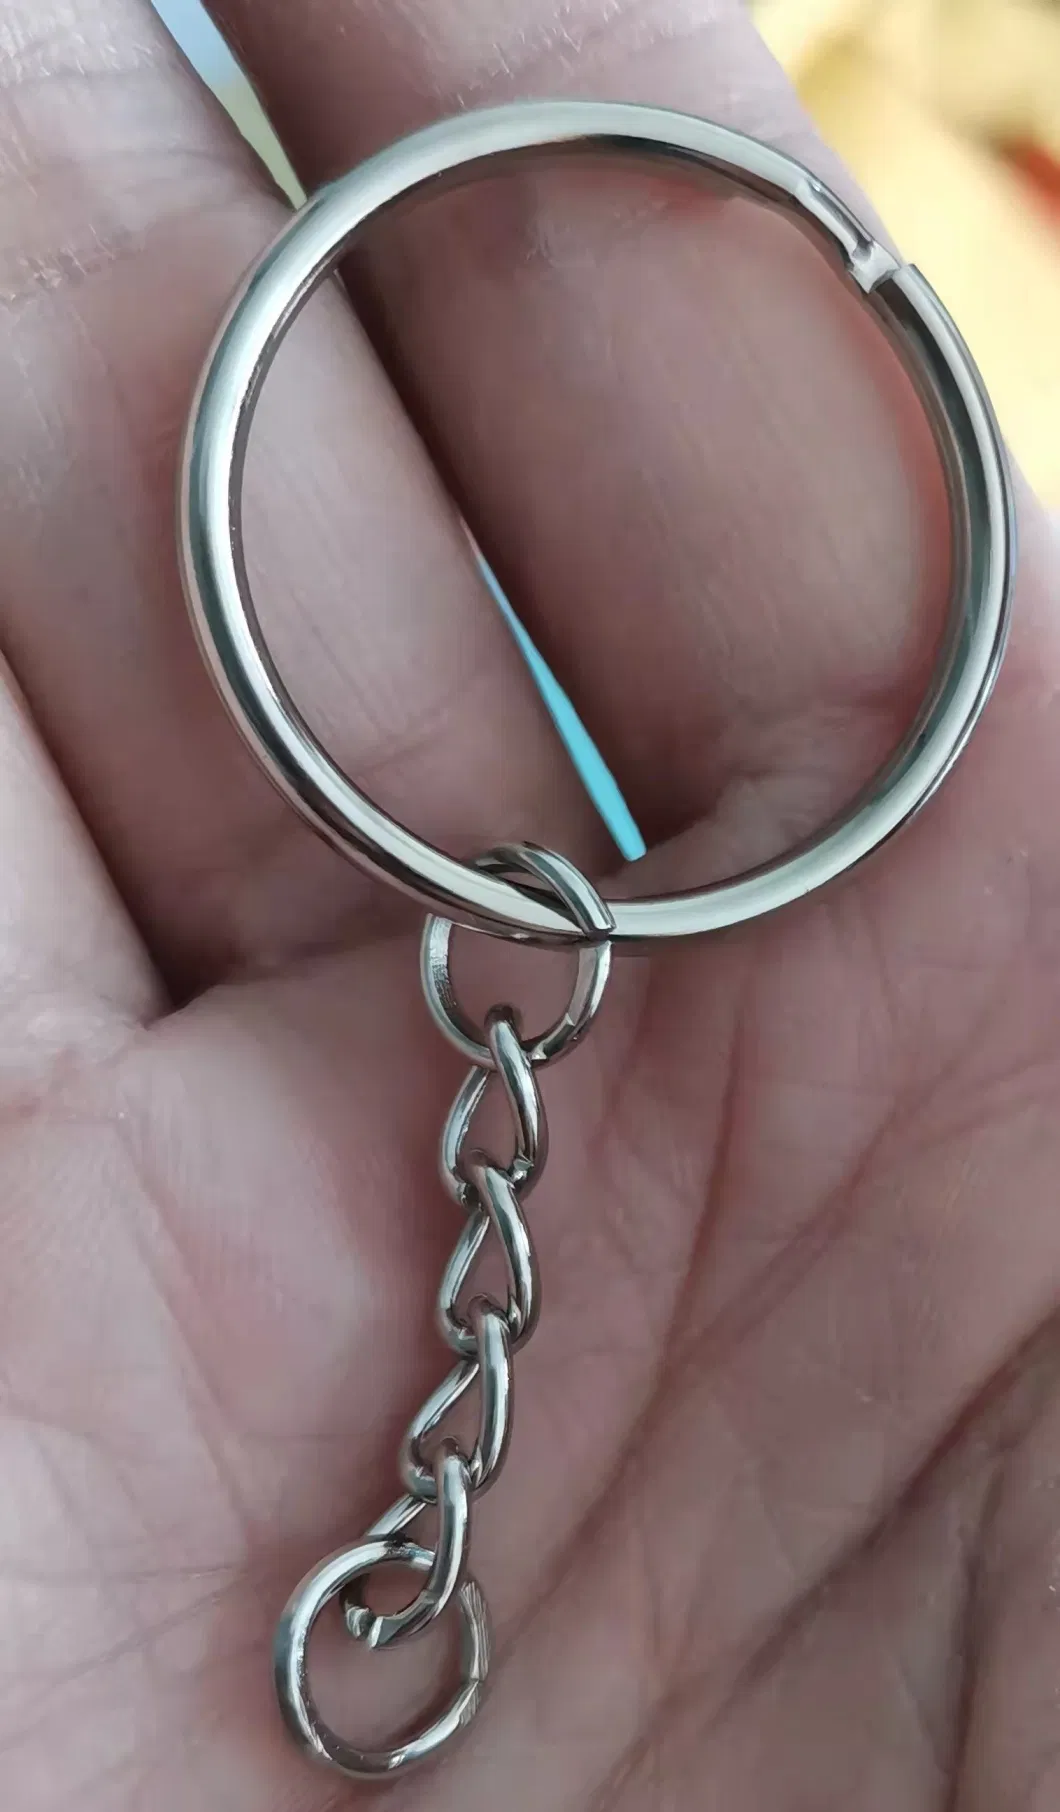 1.5*25mm Split Ring+1.2*4links Chain with a Separate Jump Ring Keyring